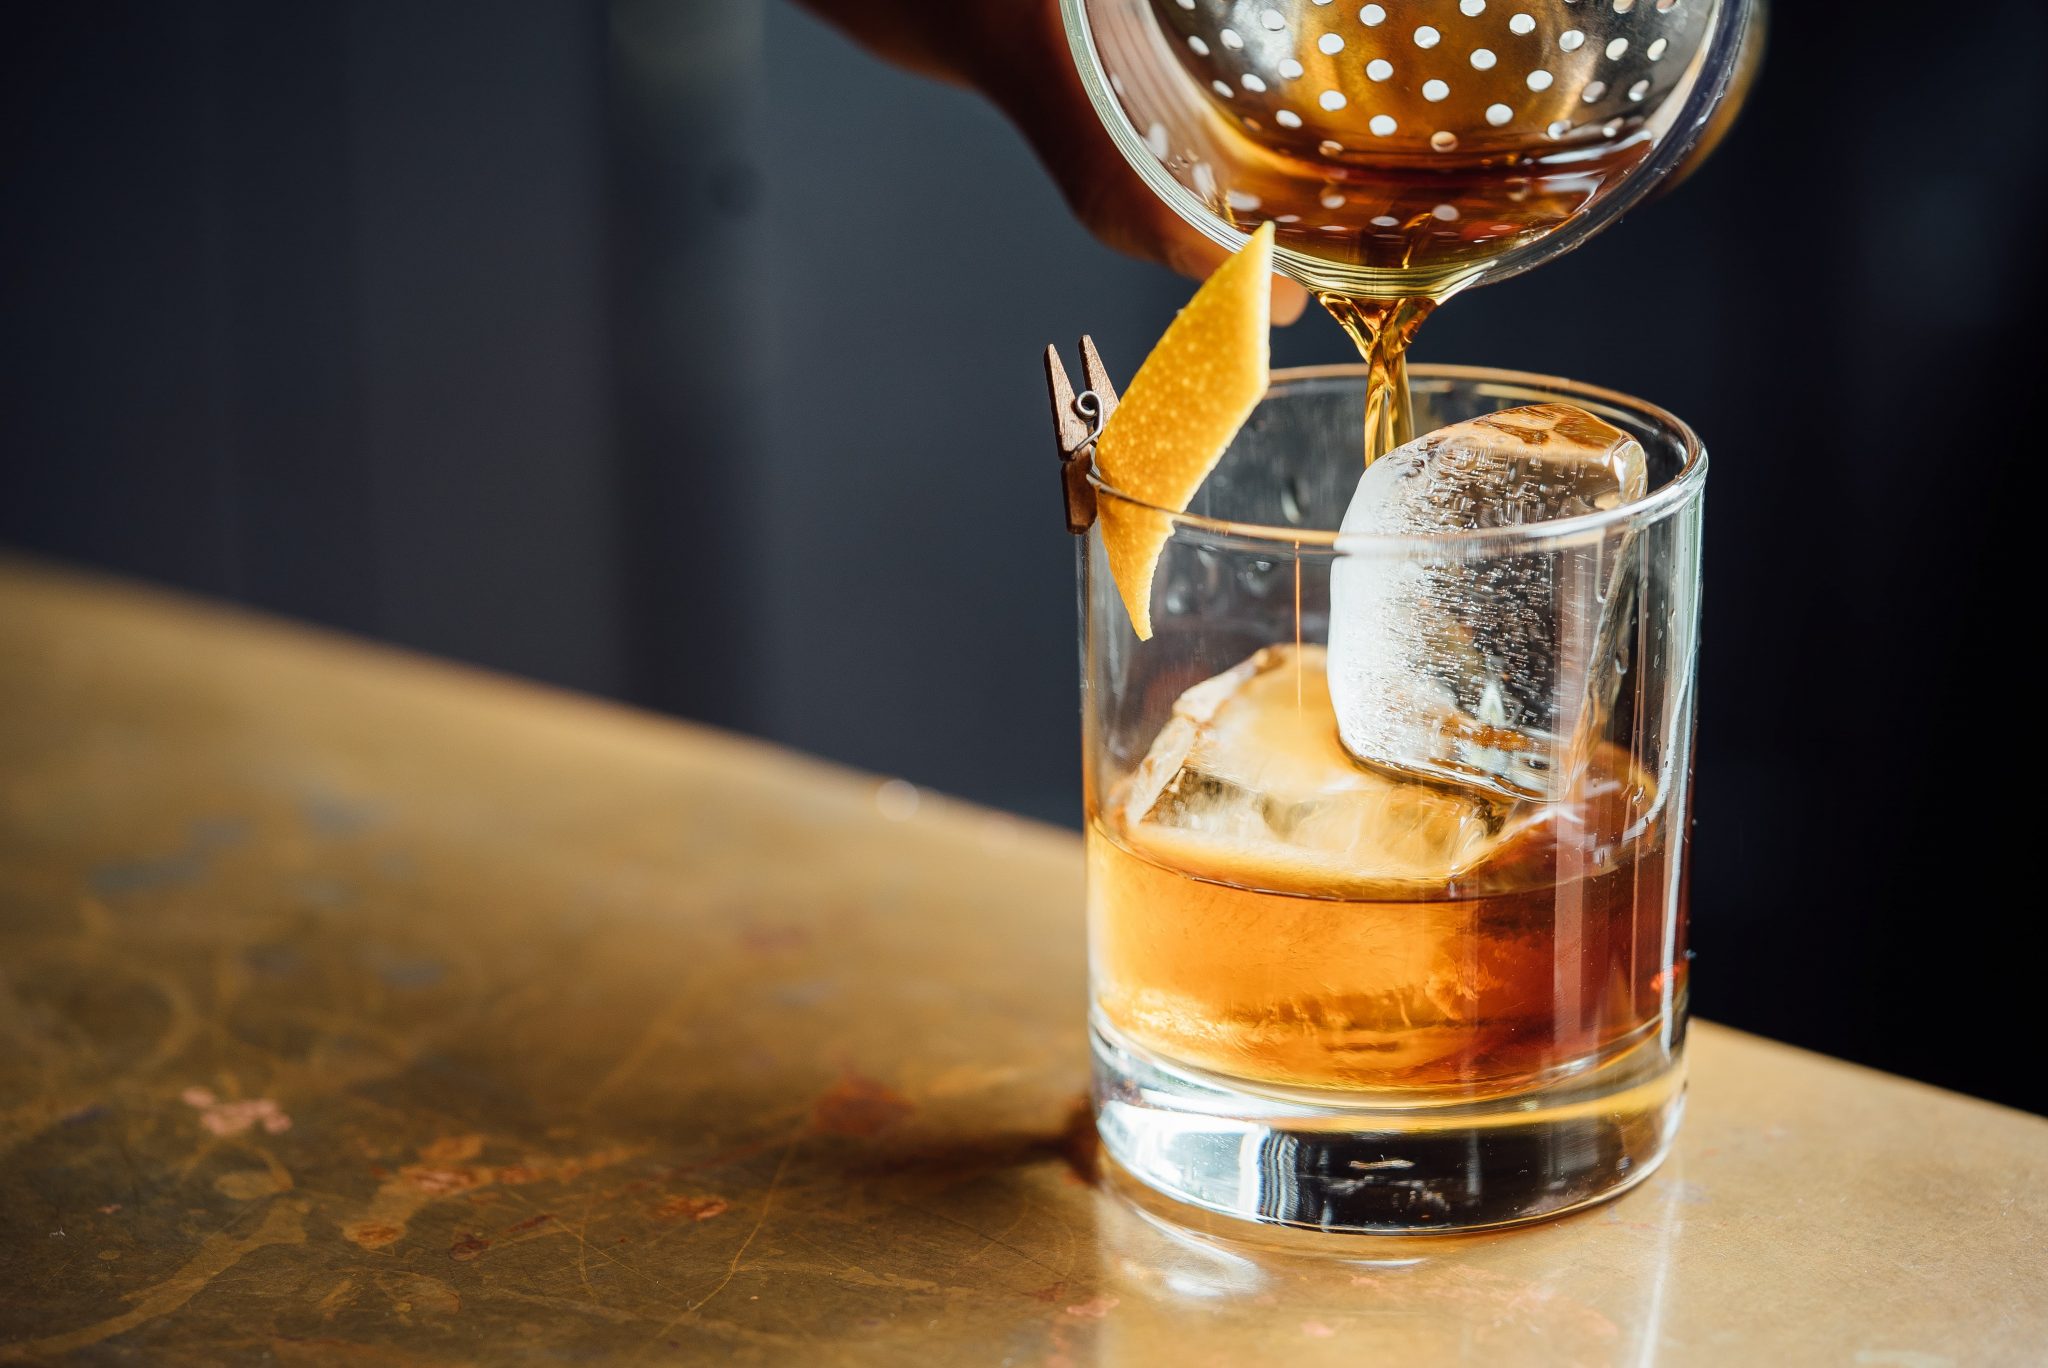 Your Home Bar Is Incomplete Without These Top Whisky Brands